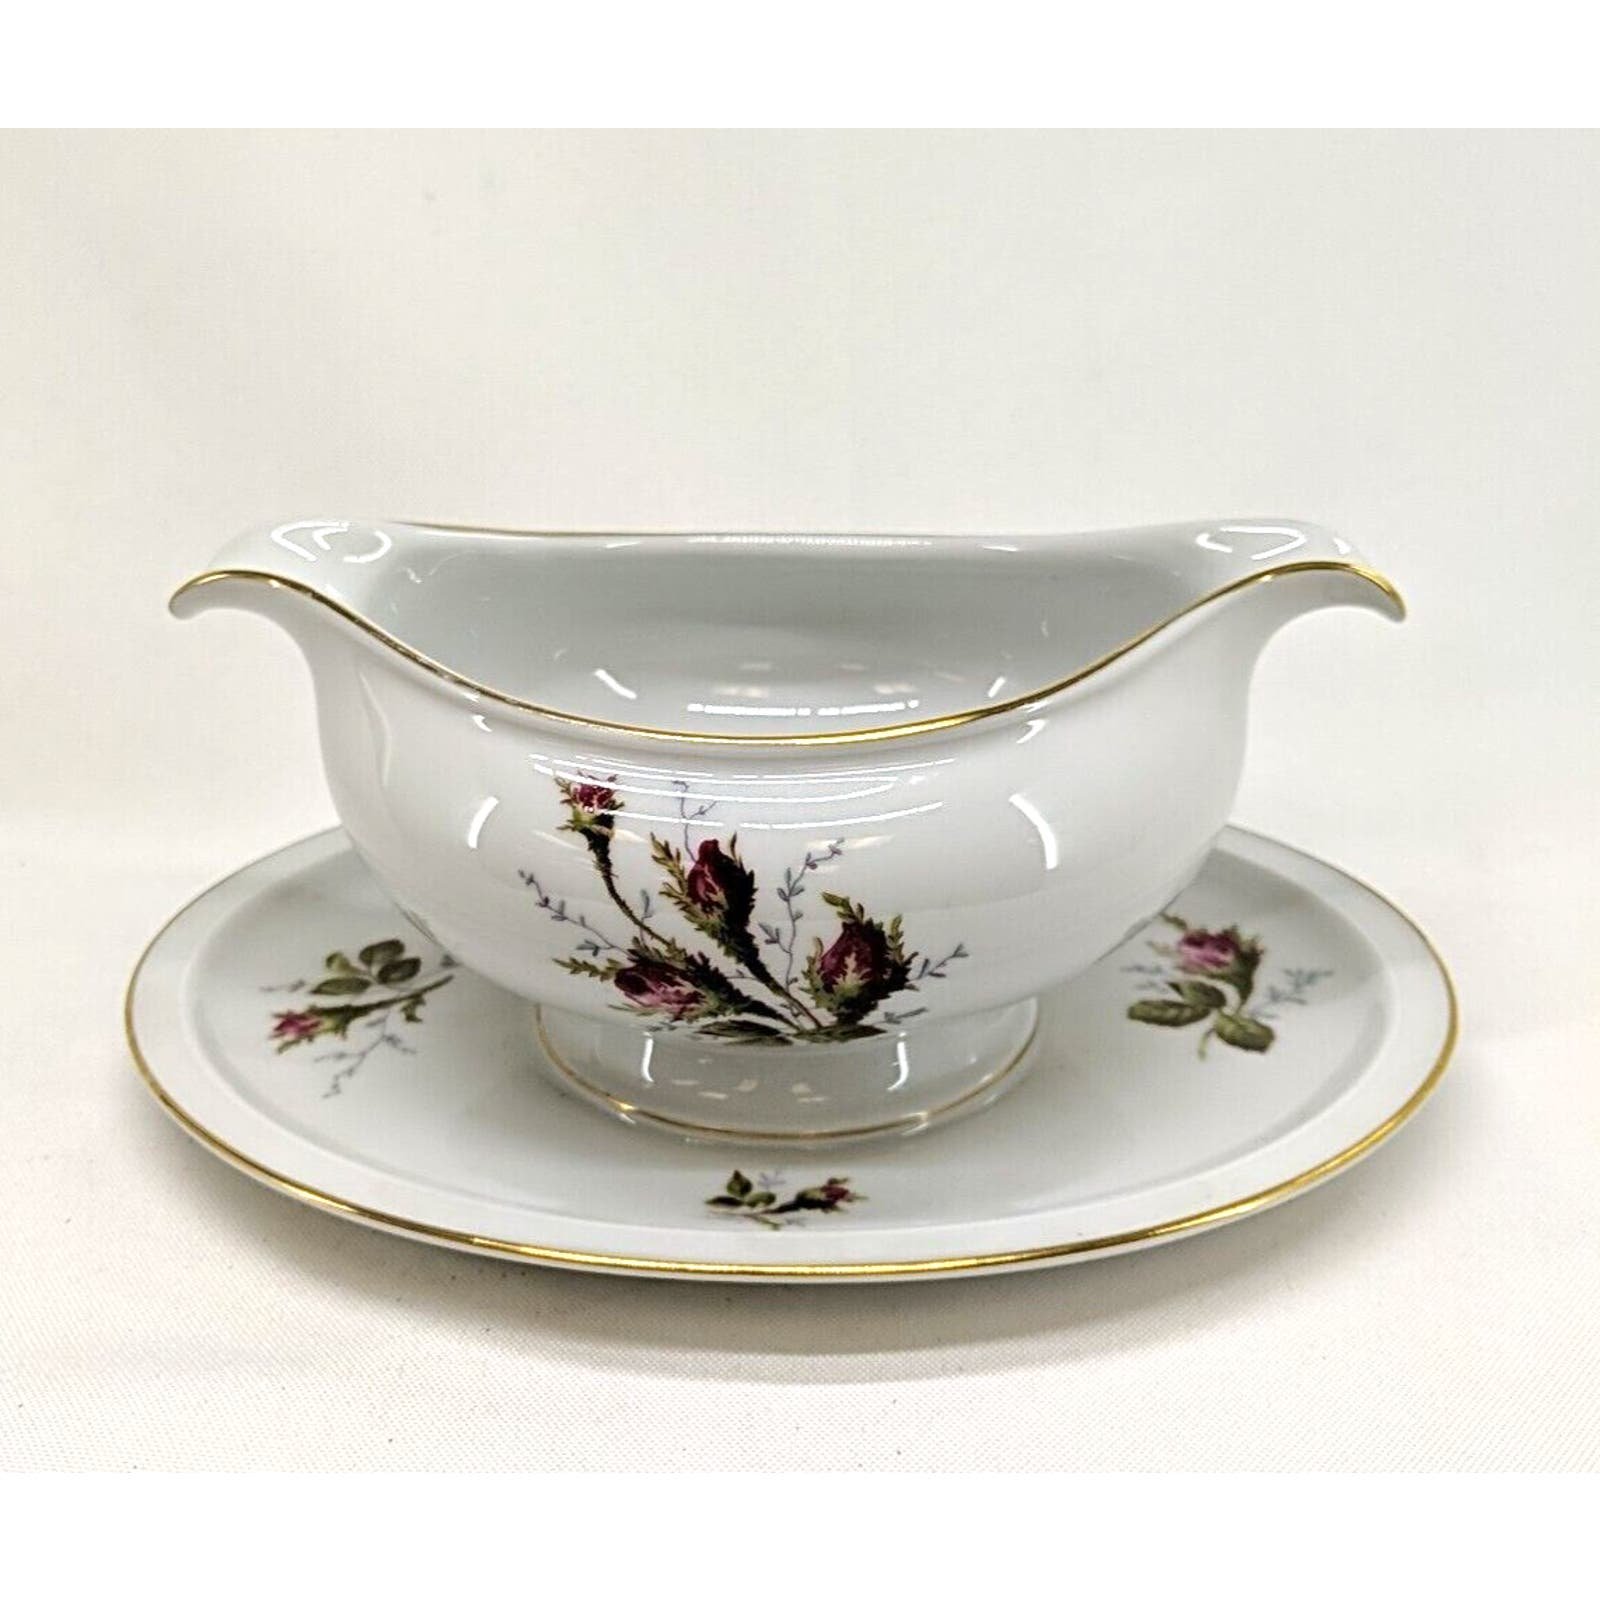 Rosenthal Germany Winifred Moss Rose Gravy Bowl with At